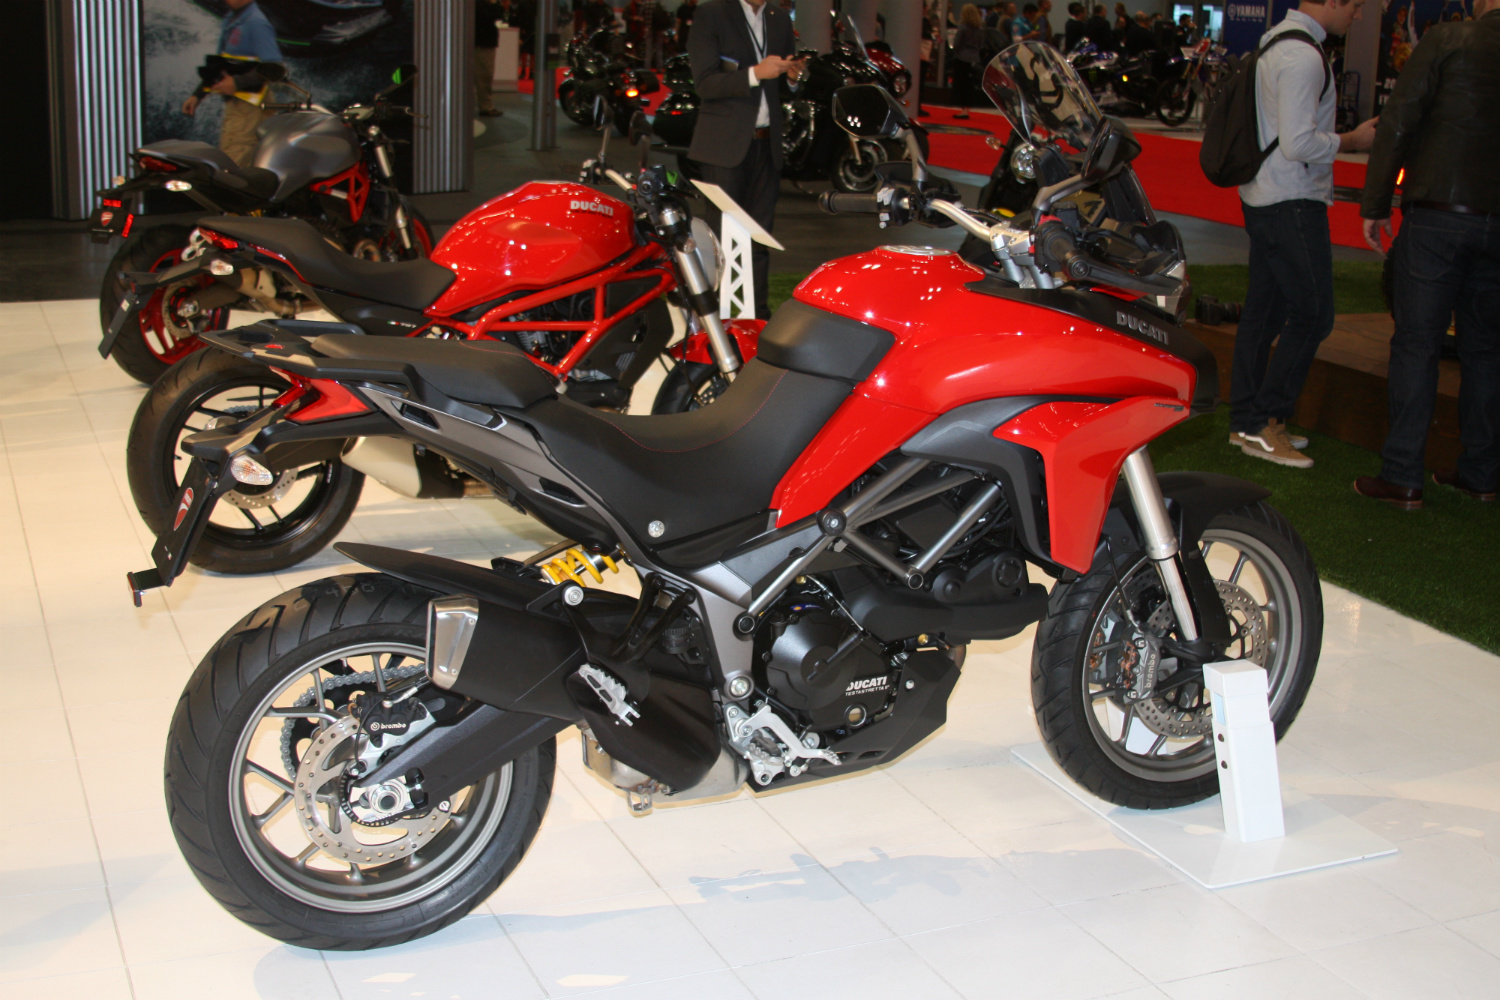 Ducati at the 2016 International Motorcycle Show